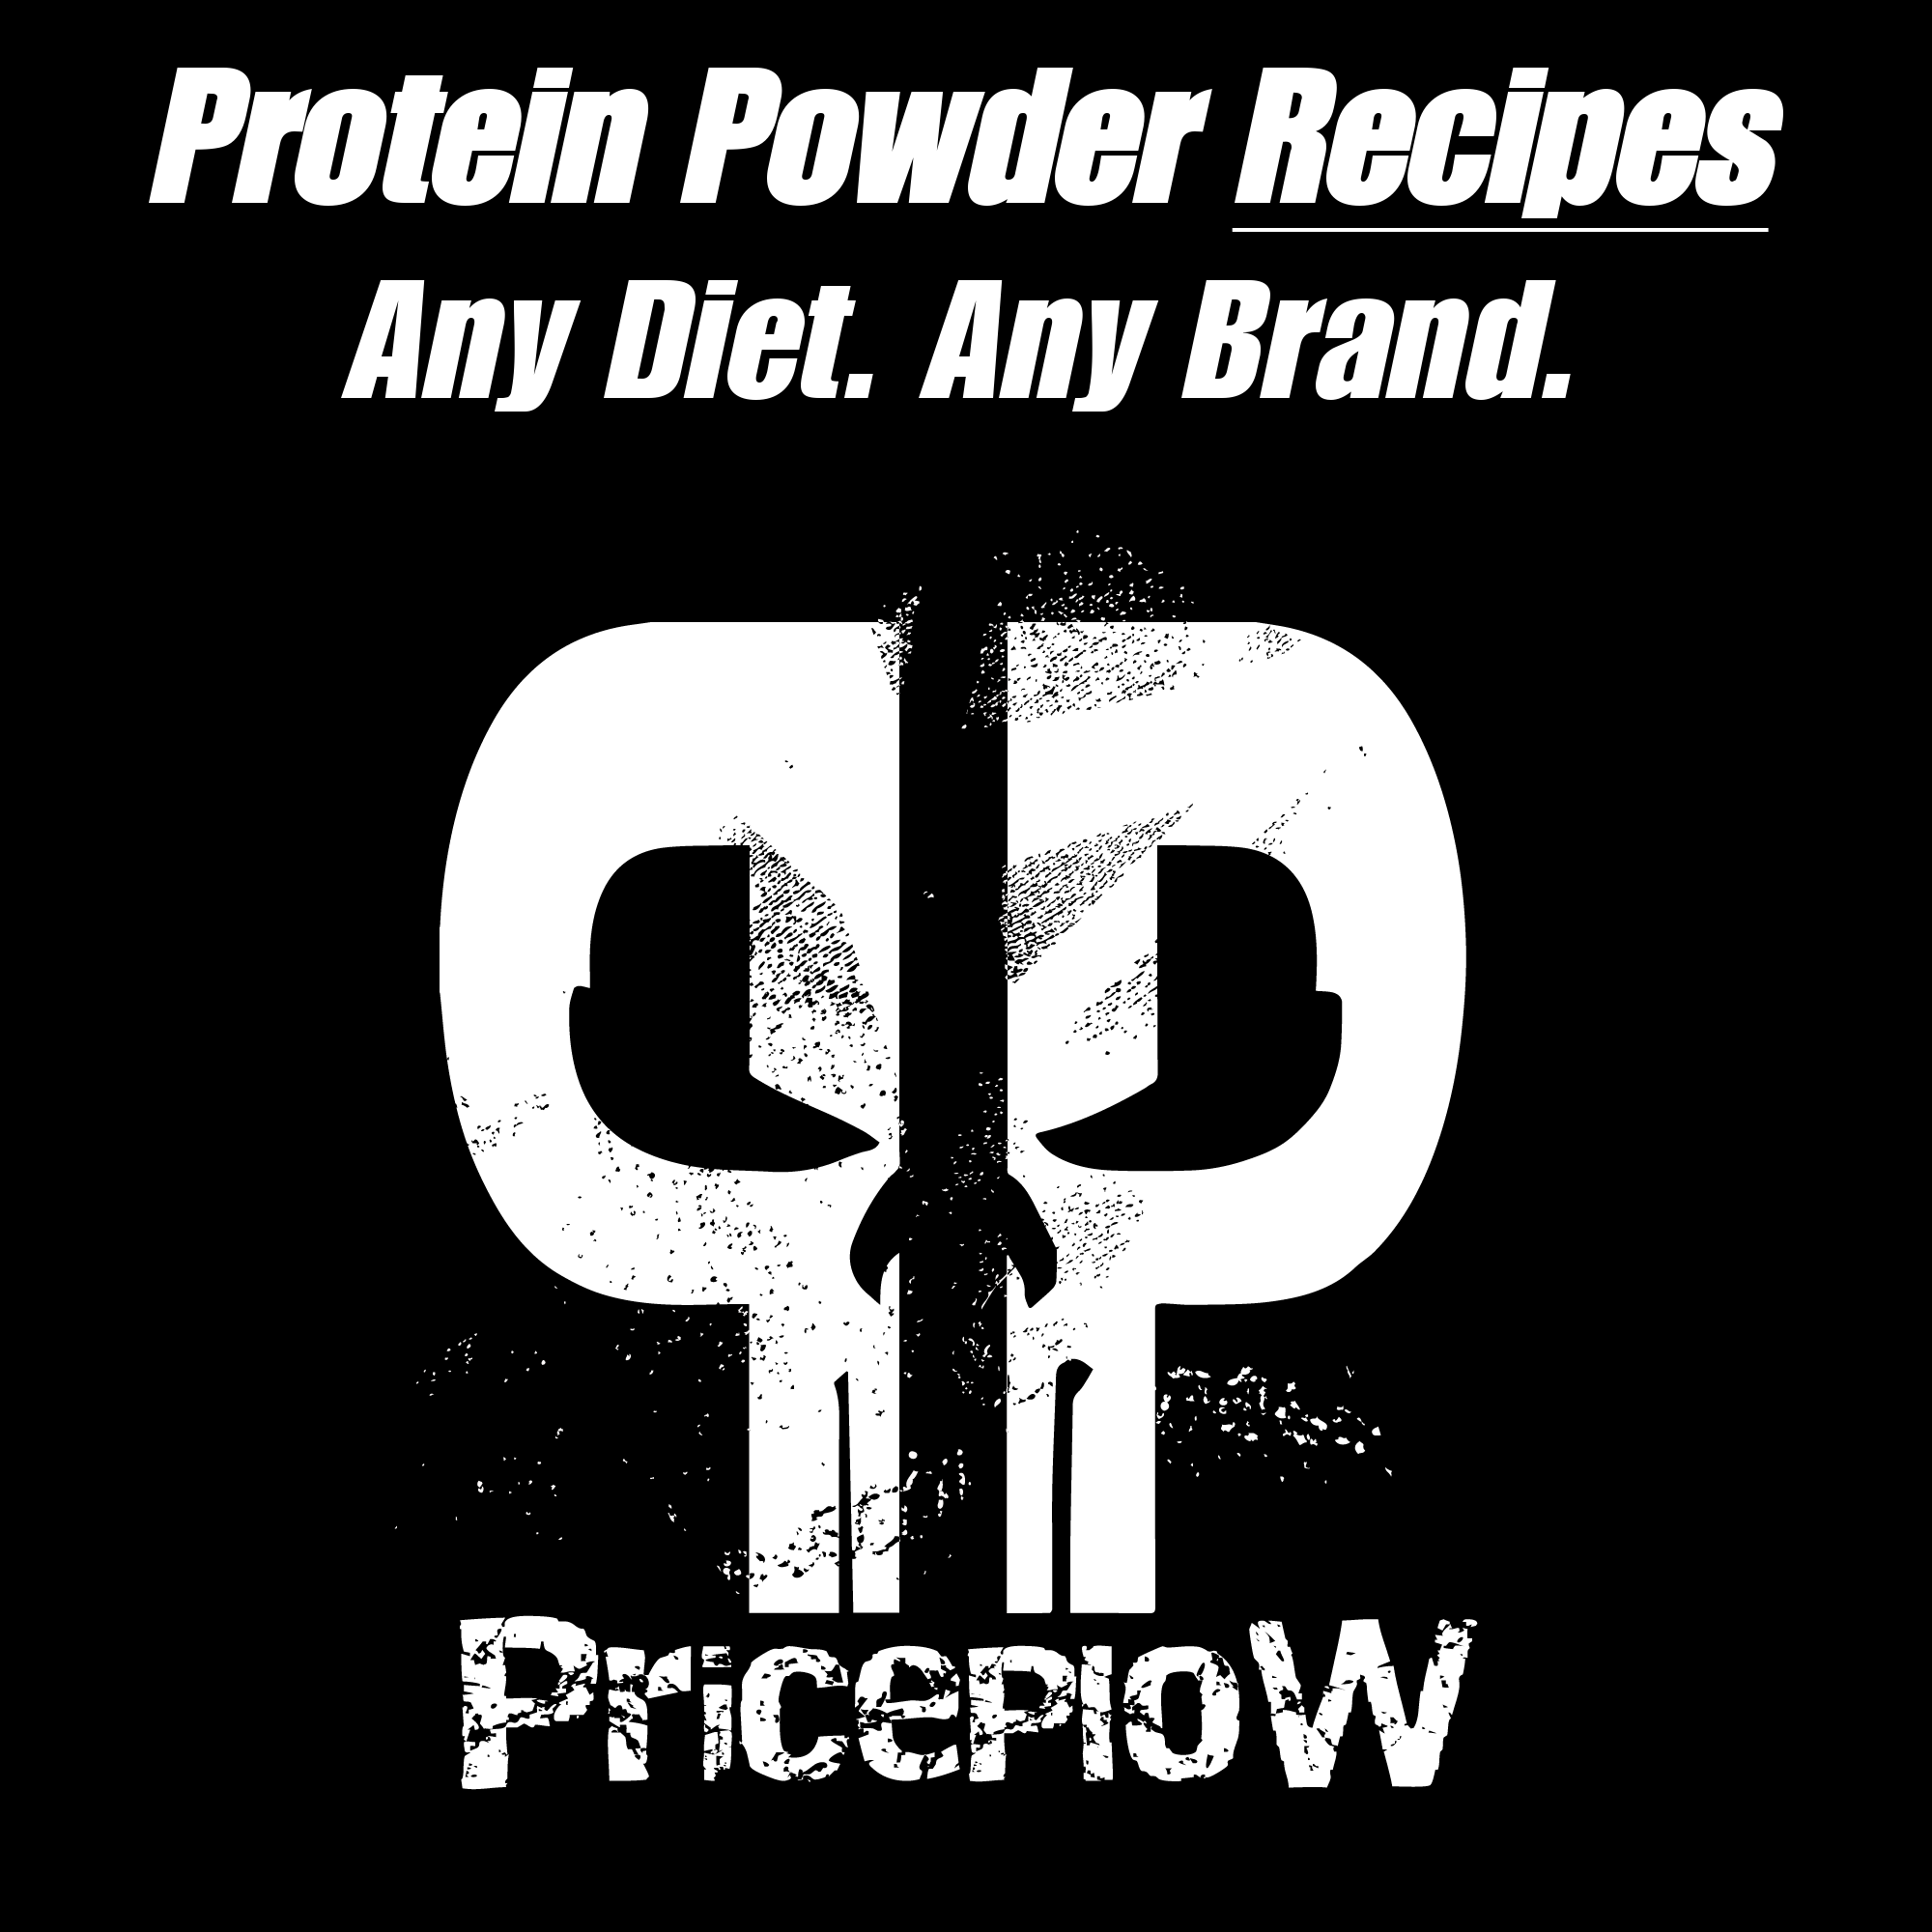 Protein Powder Recipes: Our Favorites From the Web